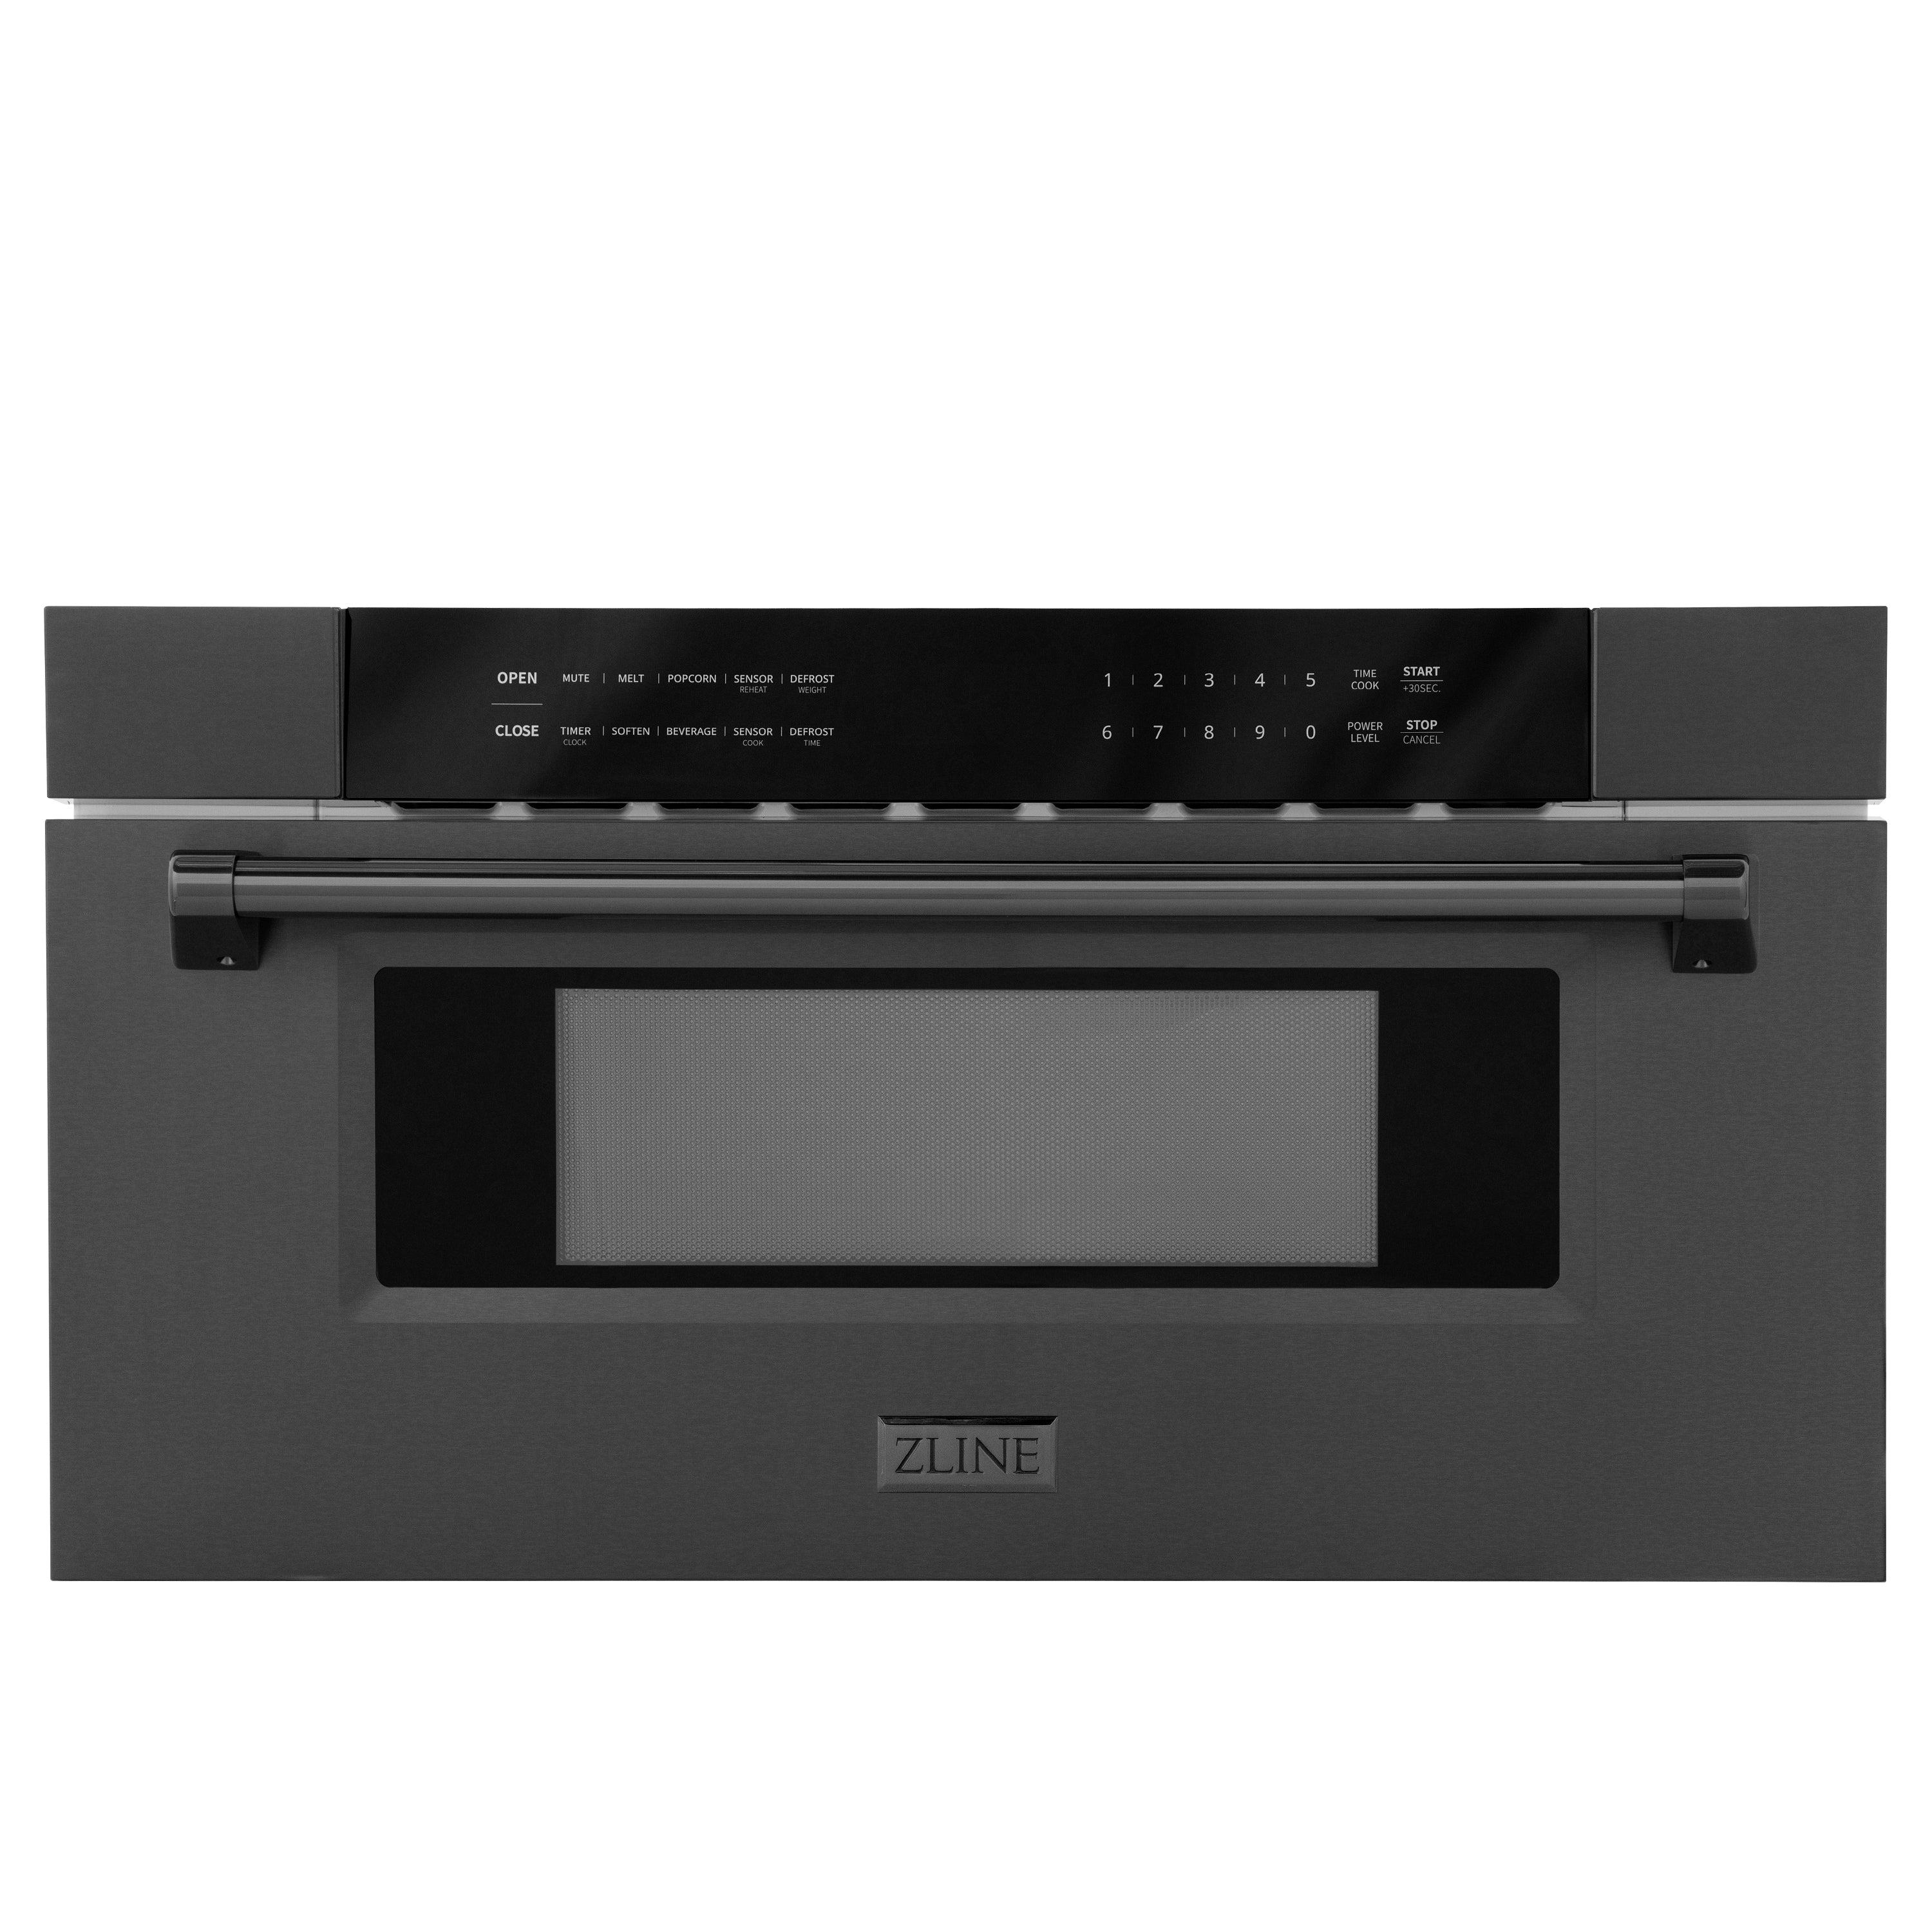 ZLINE 30 in. 1.2 cu. ft. Black Stainless Steel Built-In Microwave Drawer (MWD-30-BS) Front View Drawer Closed